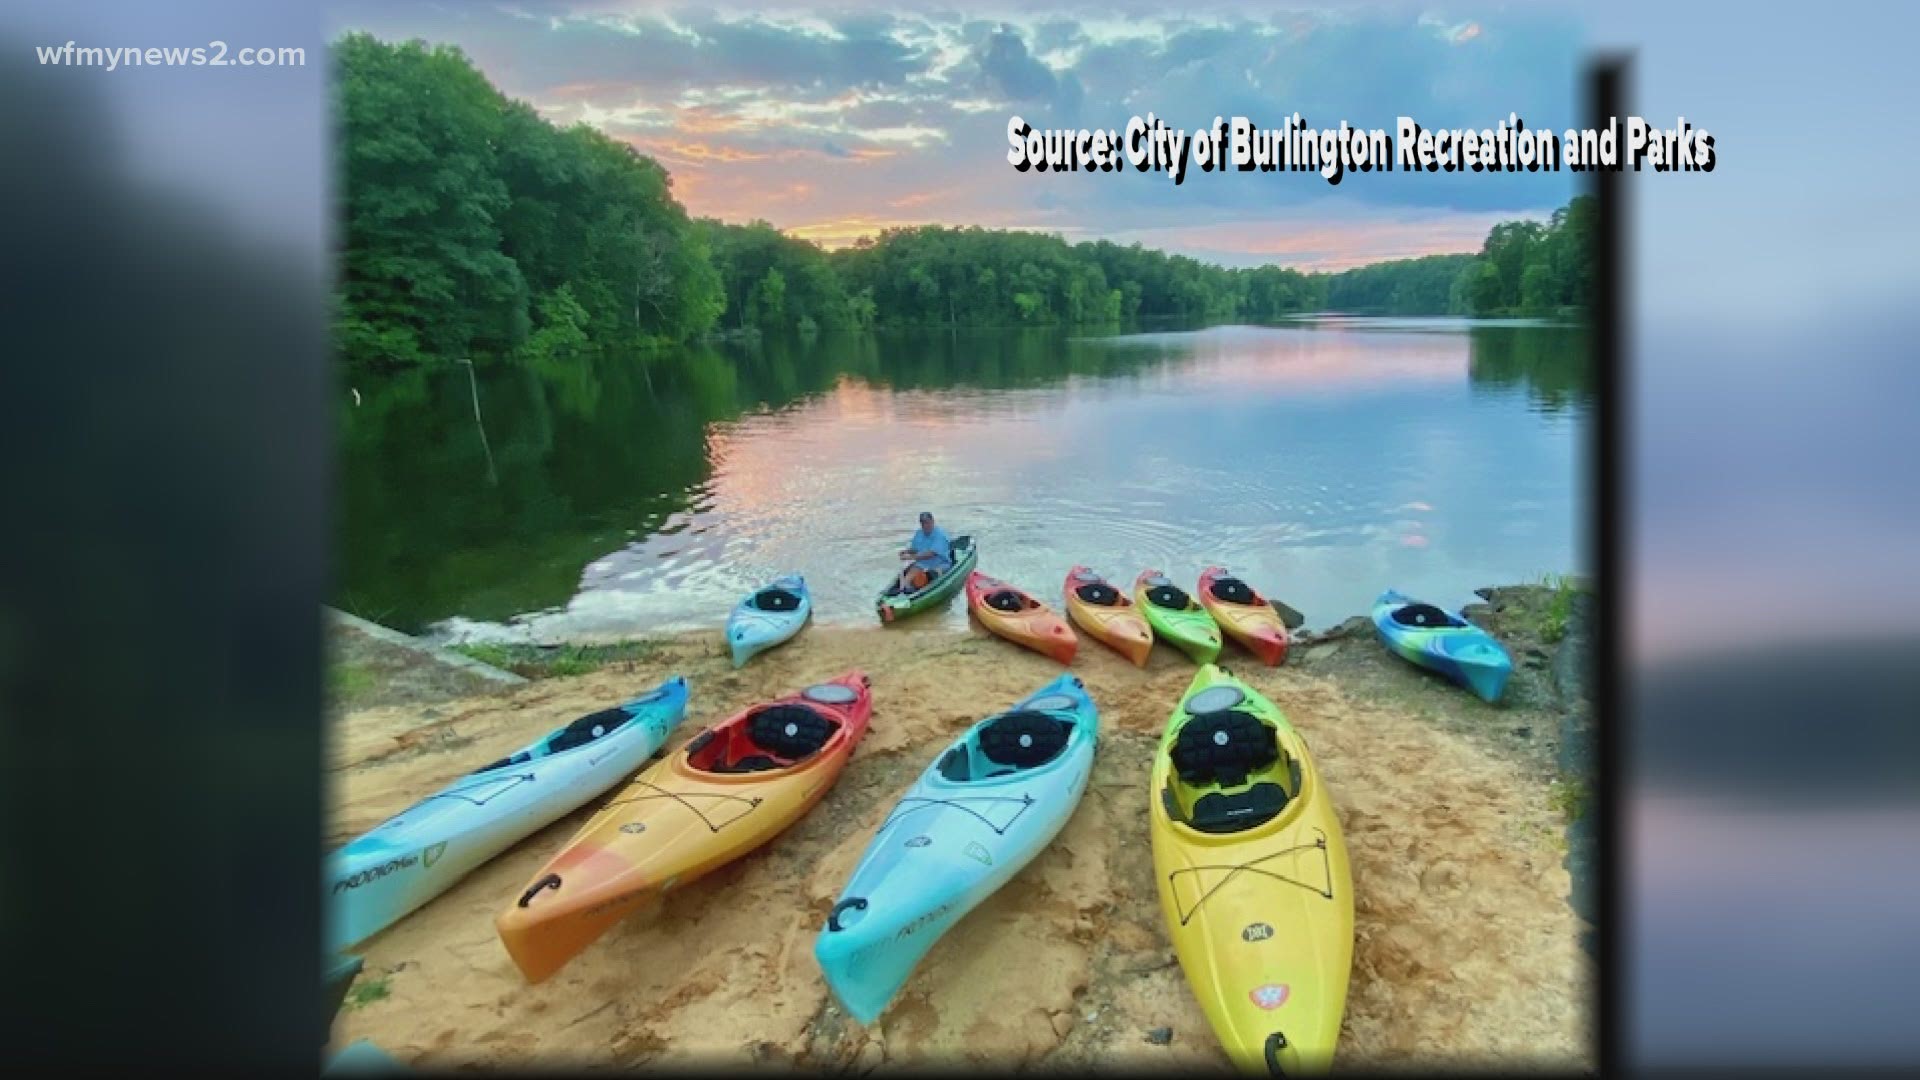 We’re all looking for a sense of normalcy. Burlington Parks and Recreation offers a two-hour guided kayak paddle on the lake.